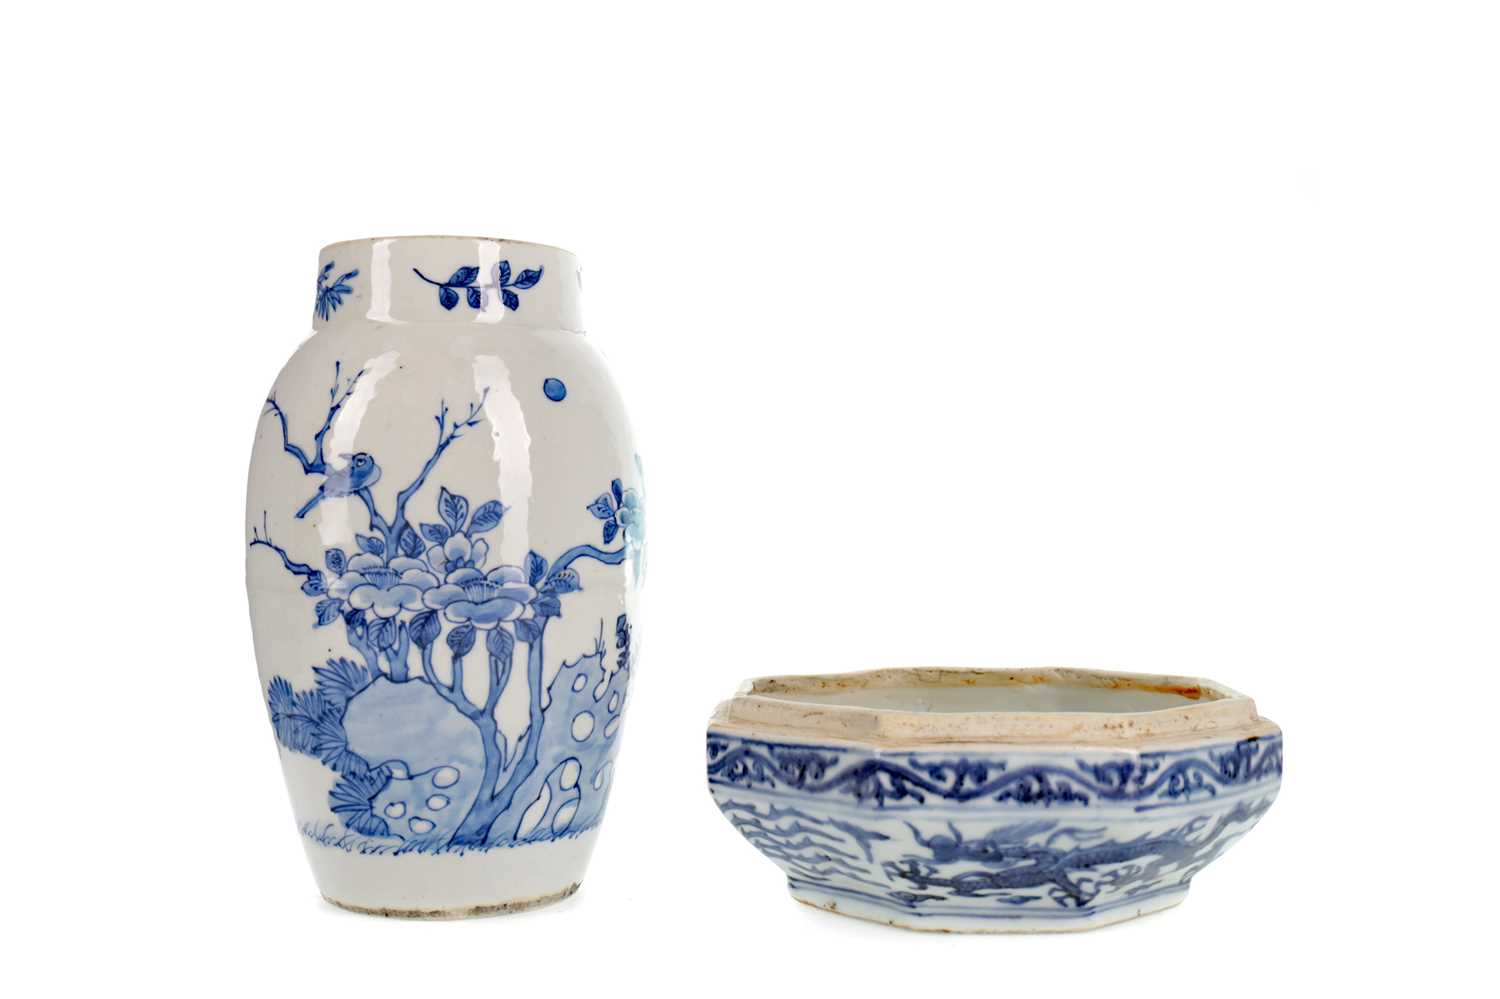 Lot 826 - AN EARLY 20TH CENTURY CHINESE VASE AND A DISH BASE